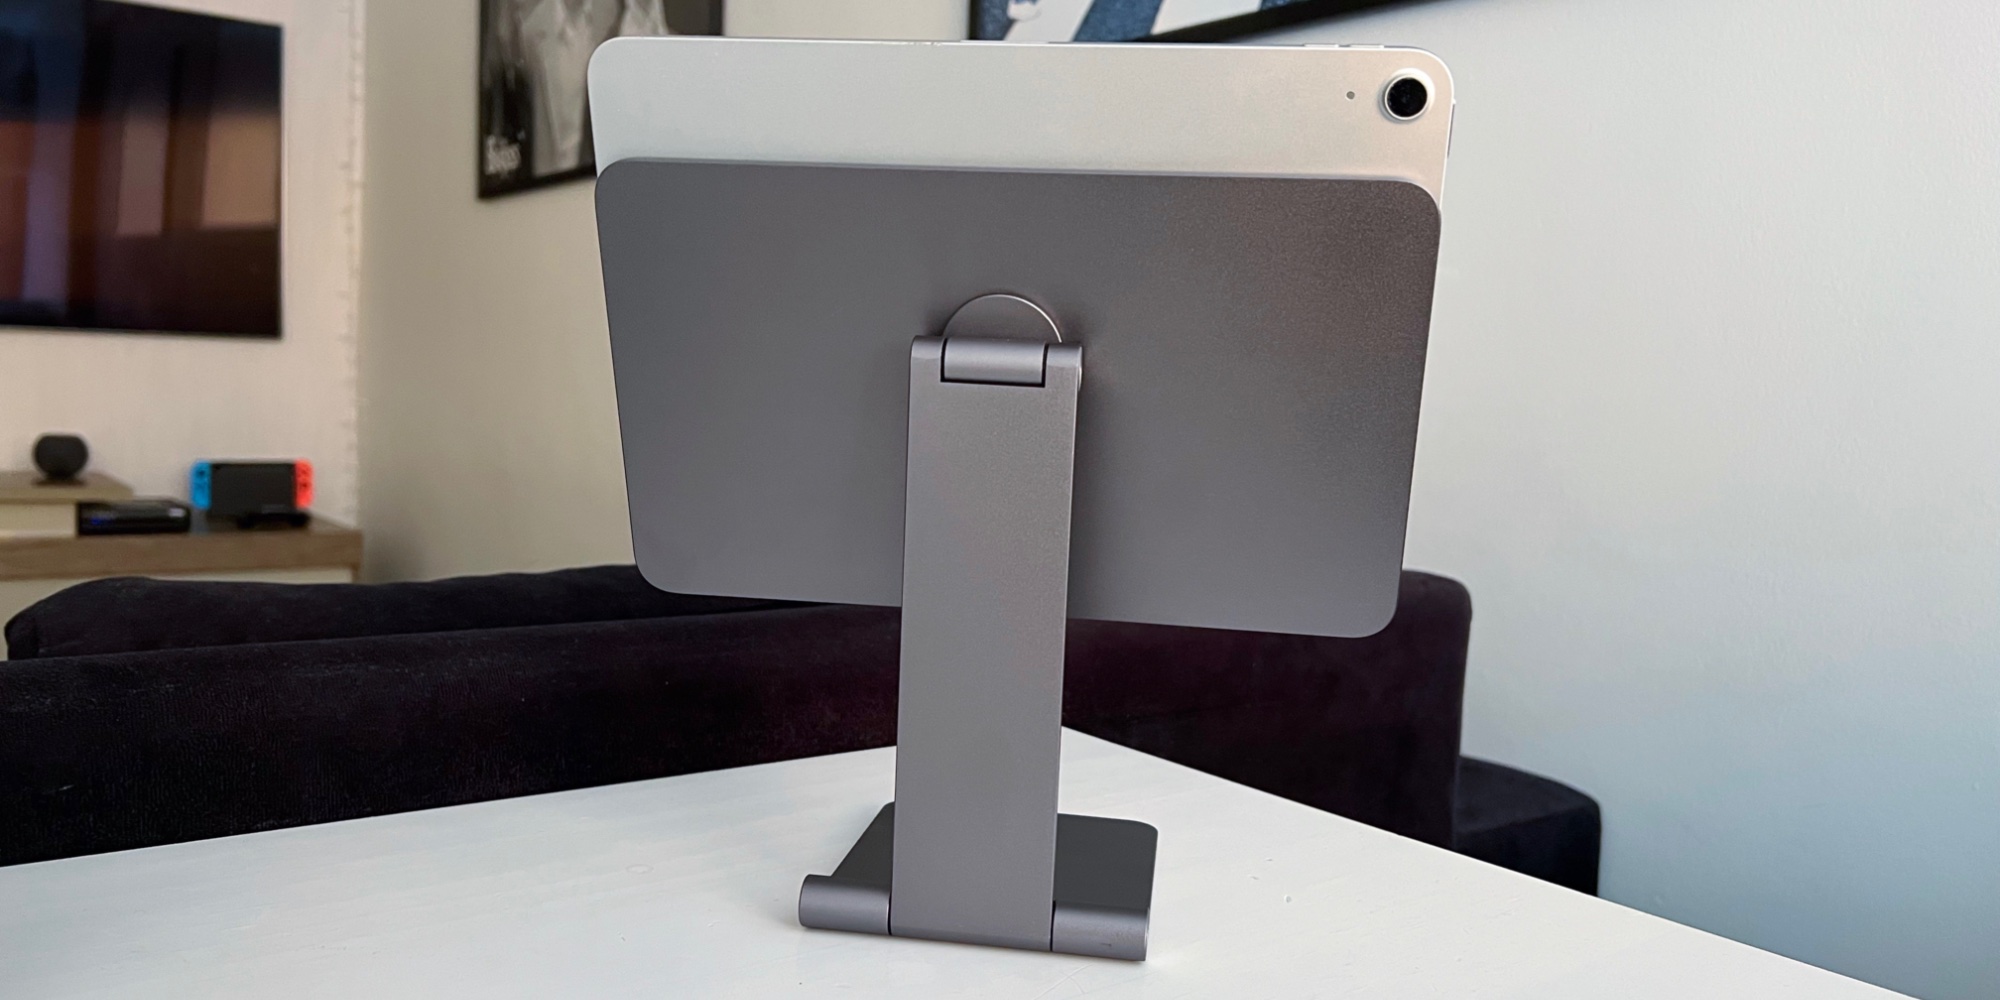 Review: Lululook Foldable Magnetic iPad Air/Pro Stand